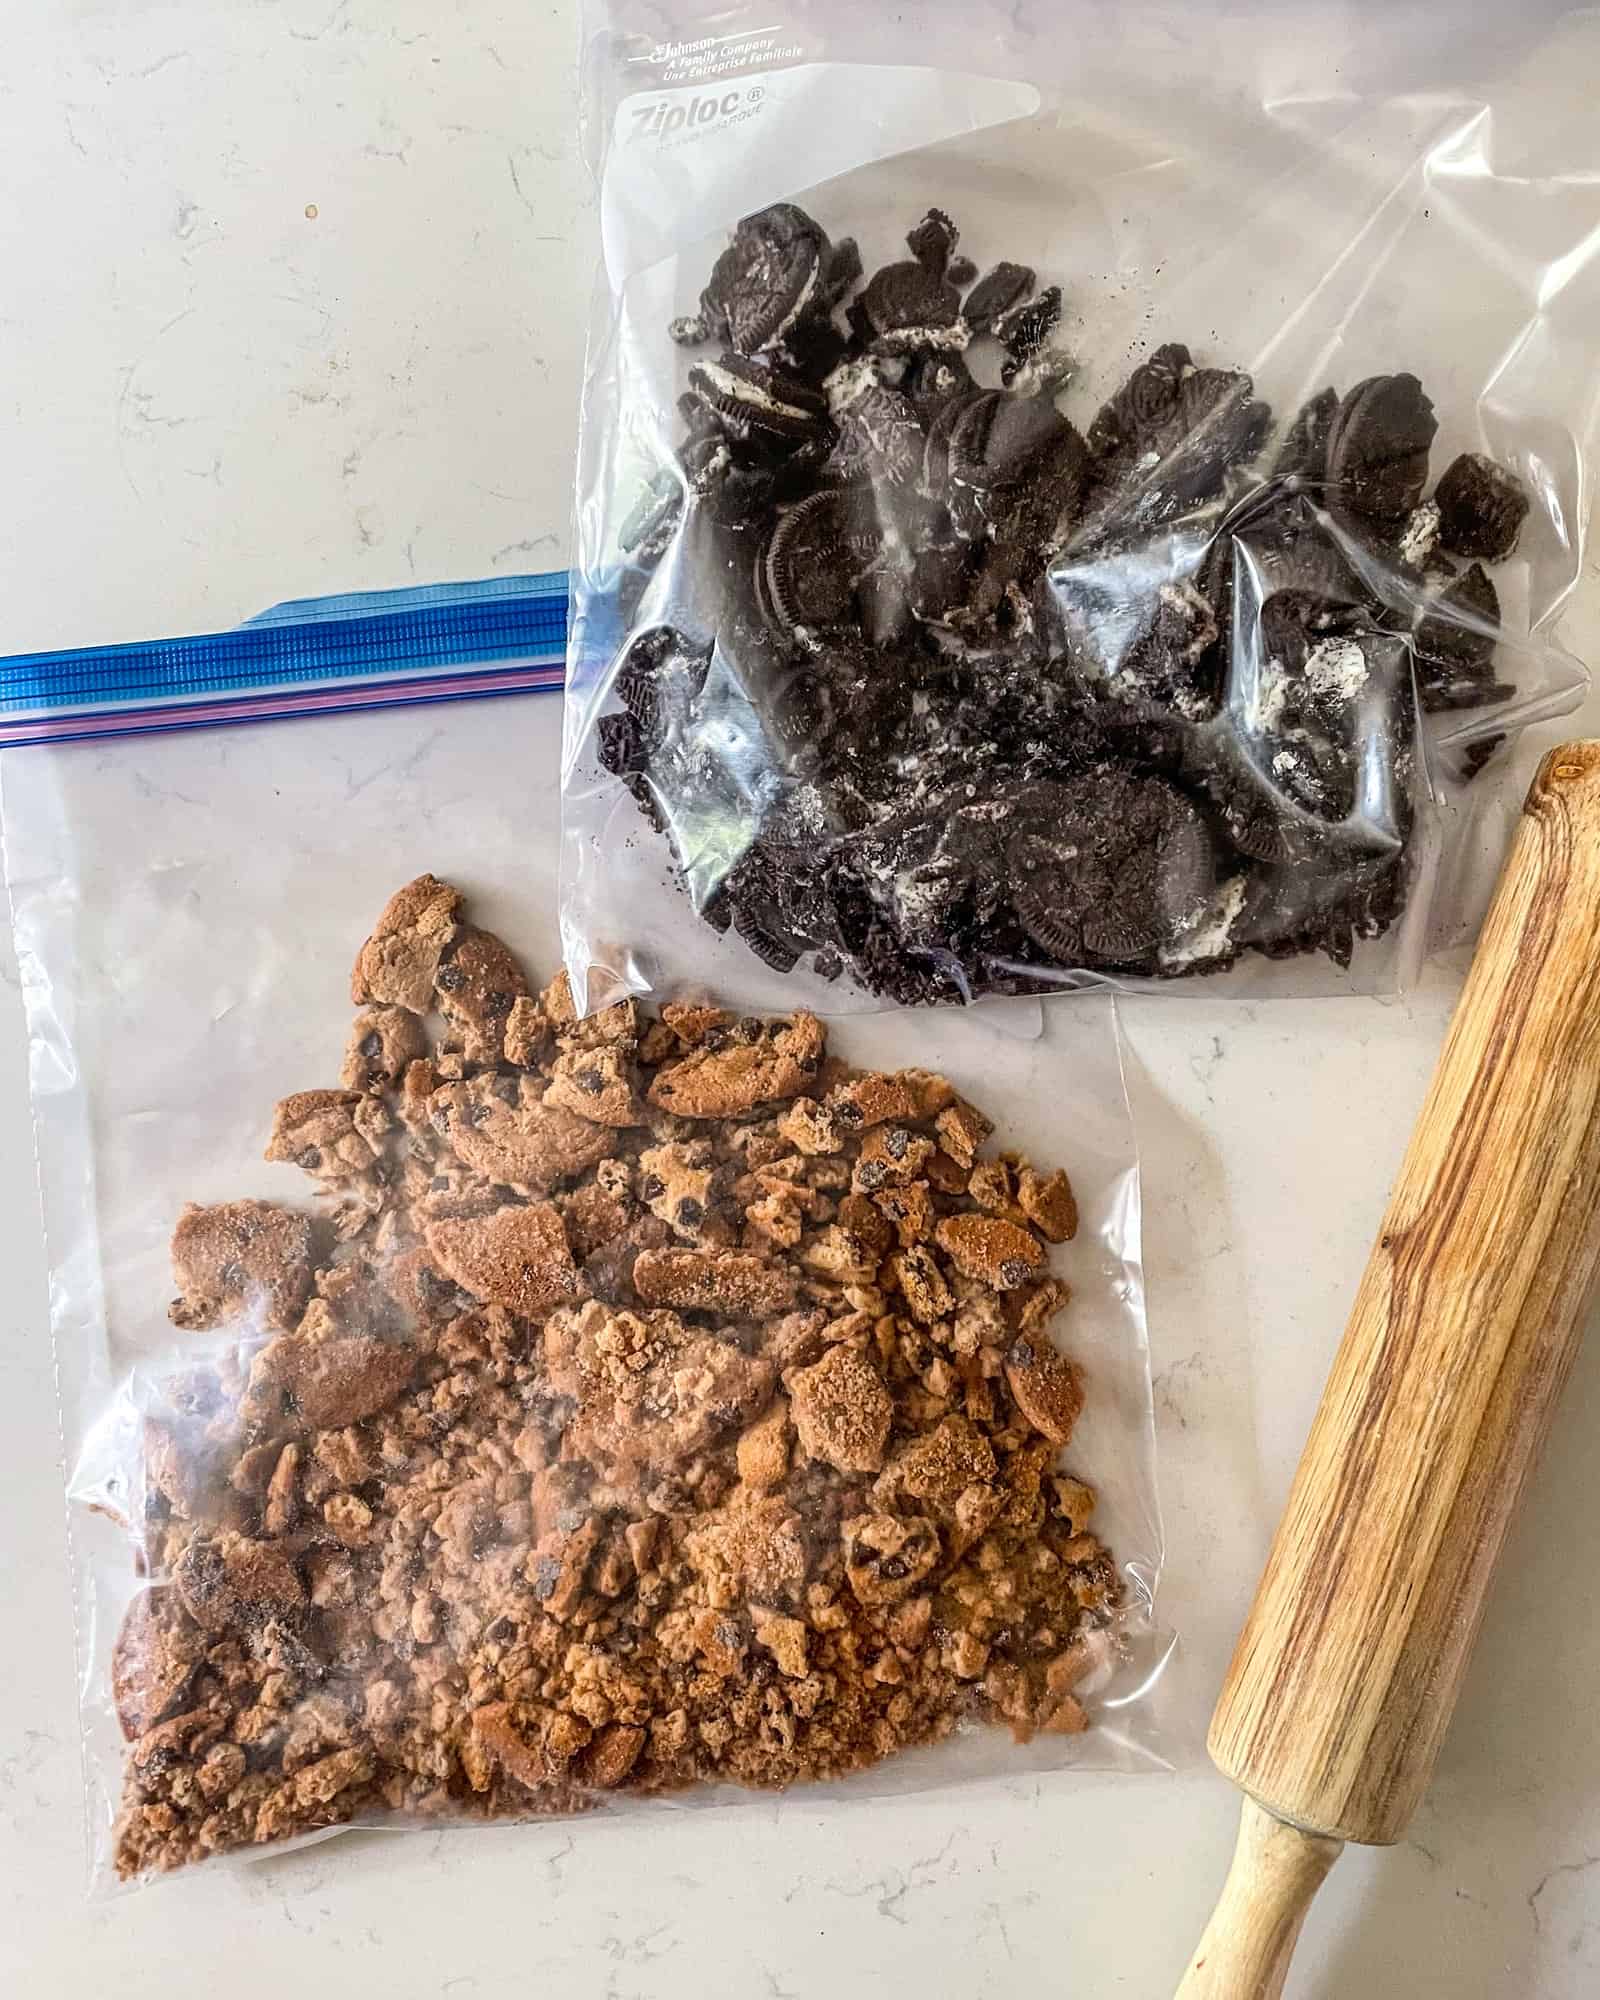 crushed oreos and chocolate chip cookies in a ziploc bag next to a dough roller.